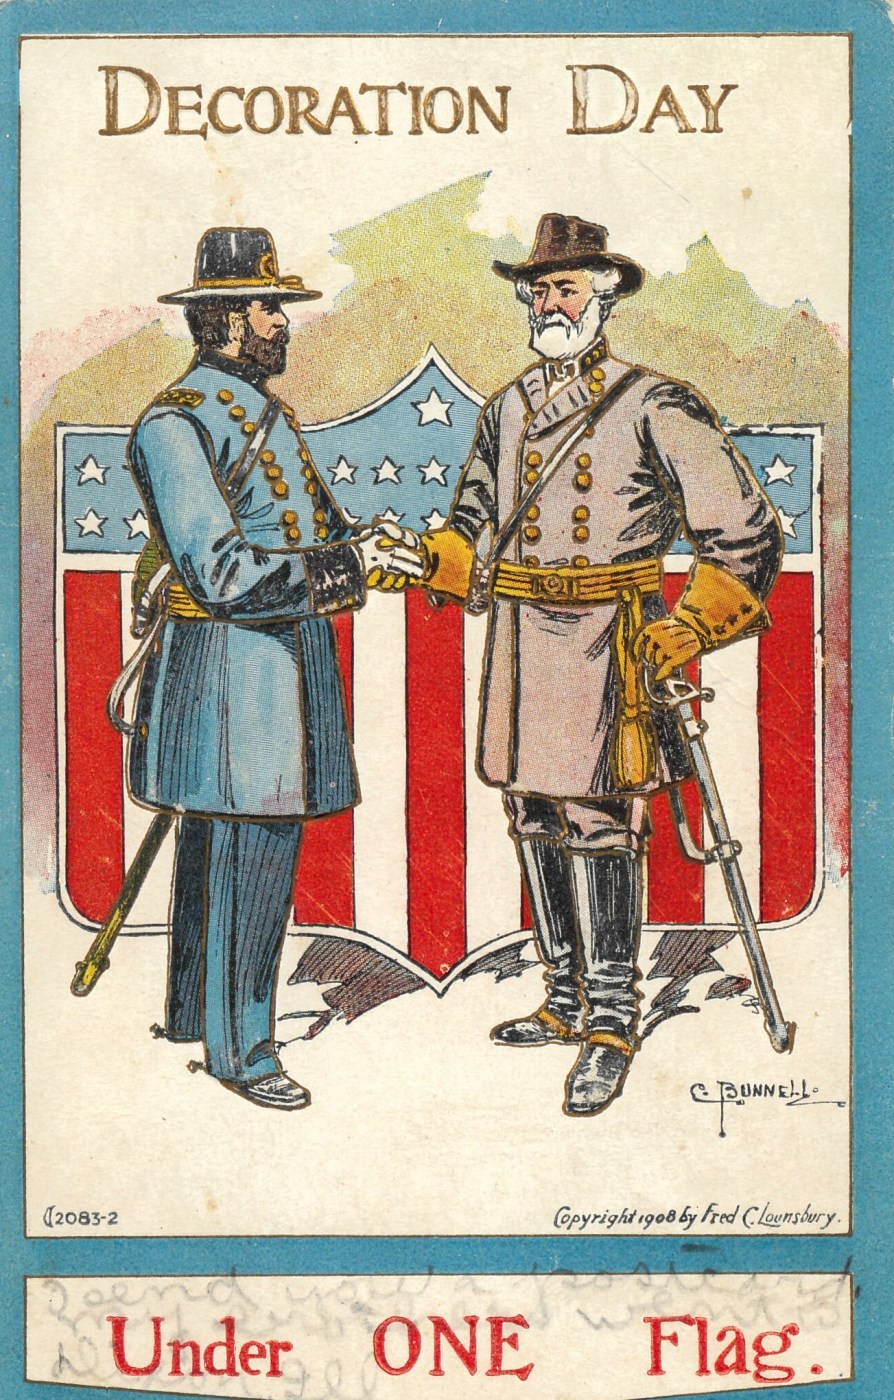 “Decoration Day, Under ONE Flag” signed C. Bunnell, embossed, cancelled July 1909. Publisher Fred C. Lounsbury, 1908. Presumably the image is of Ulysses S. Grant and Robert E. Lee. (NCA)